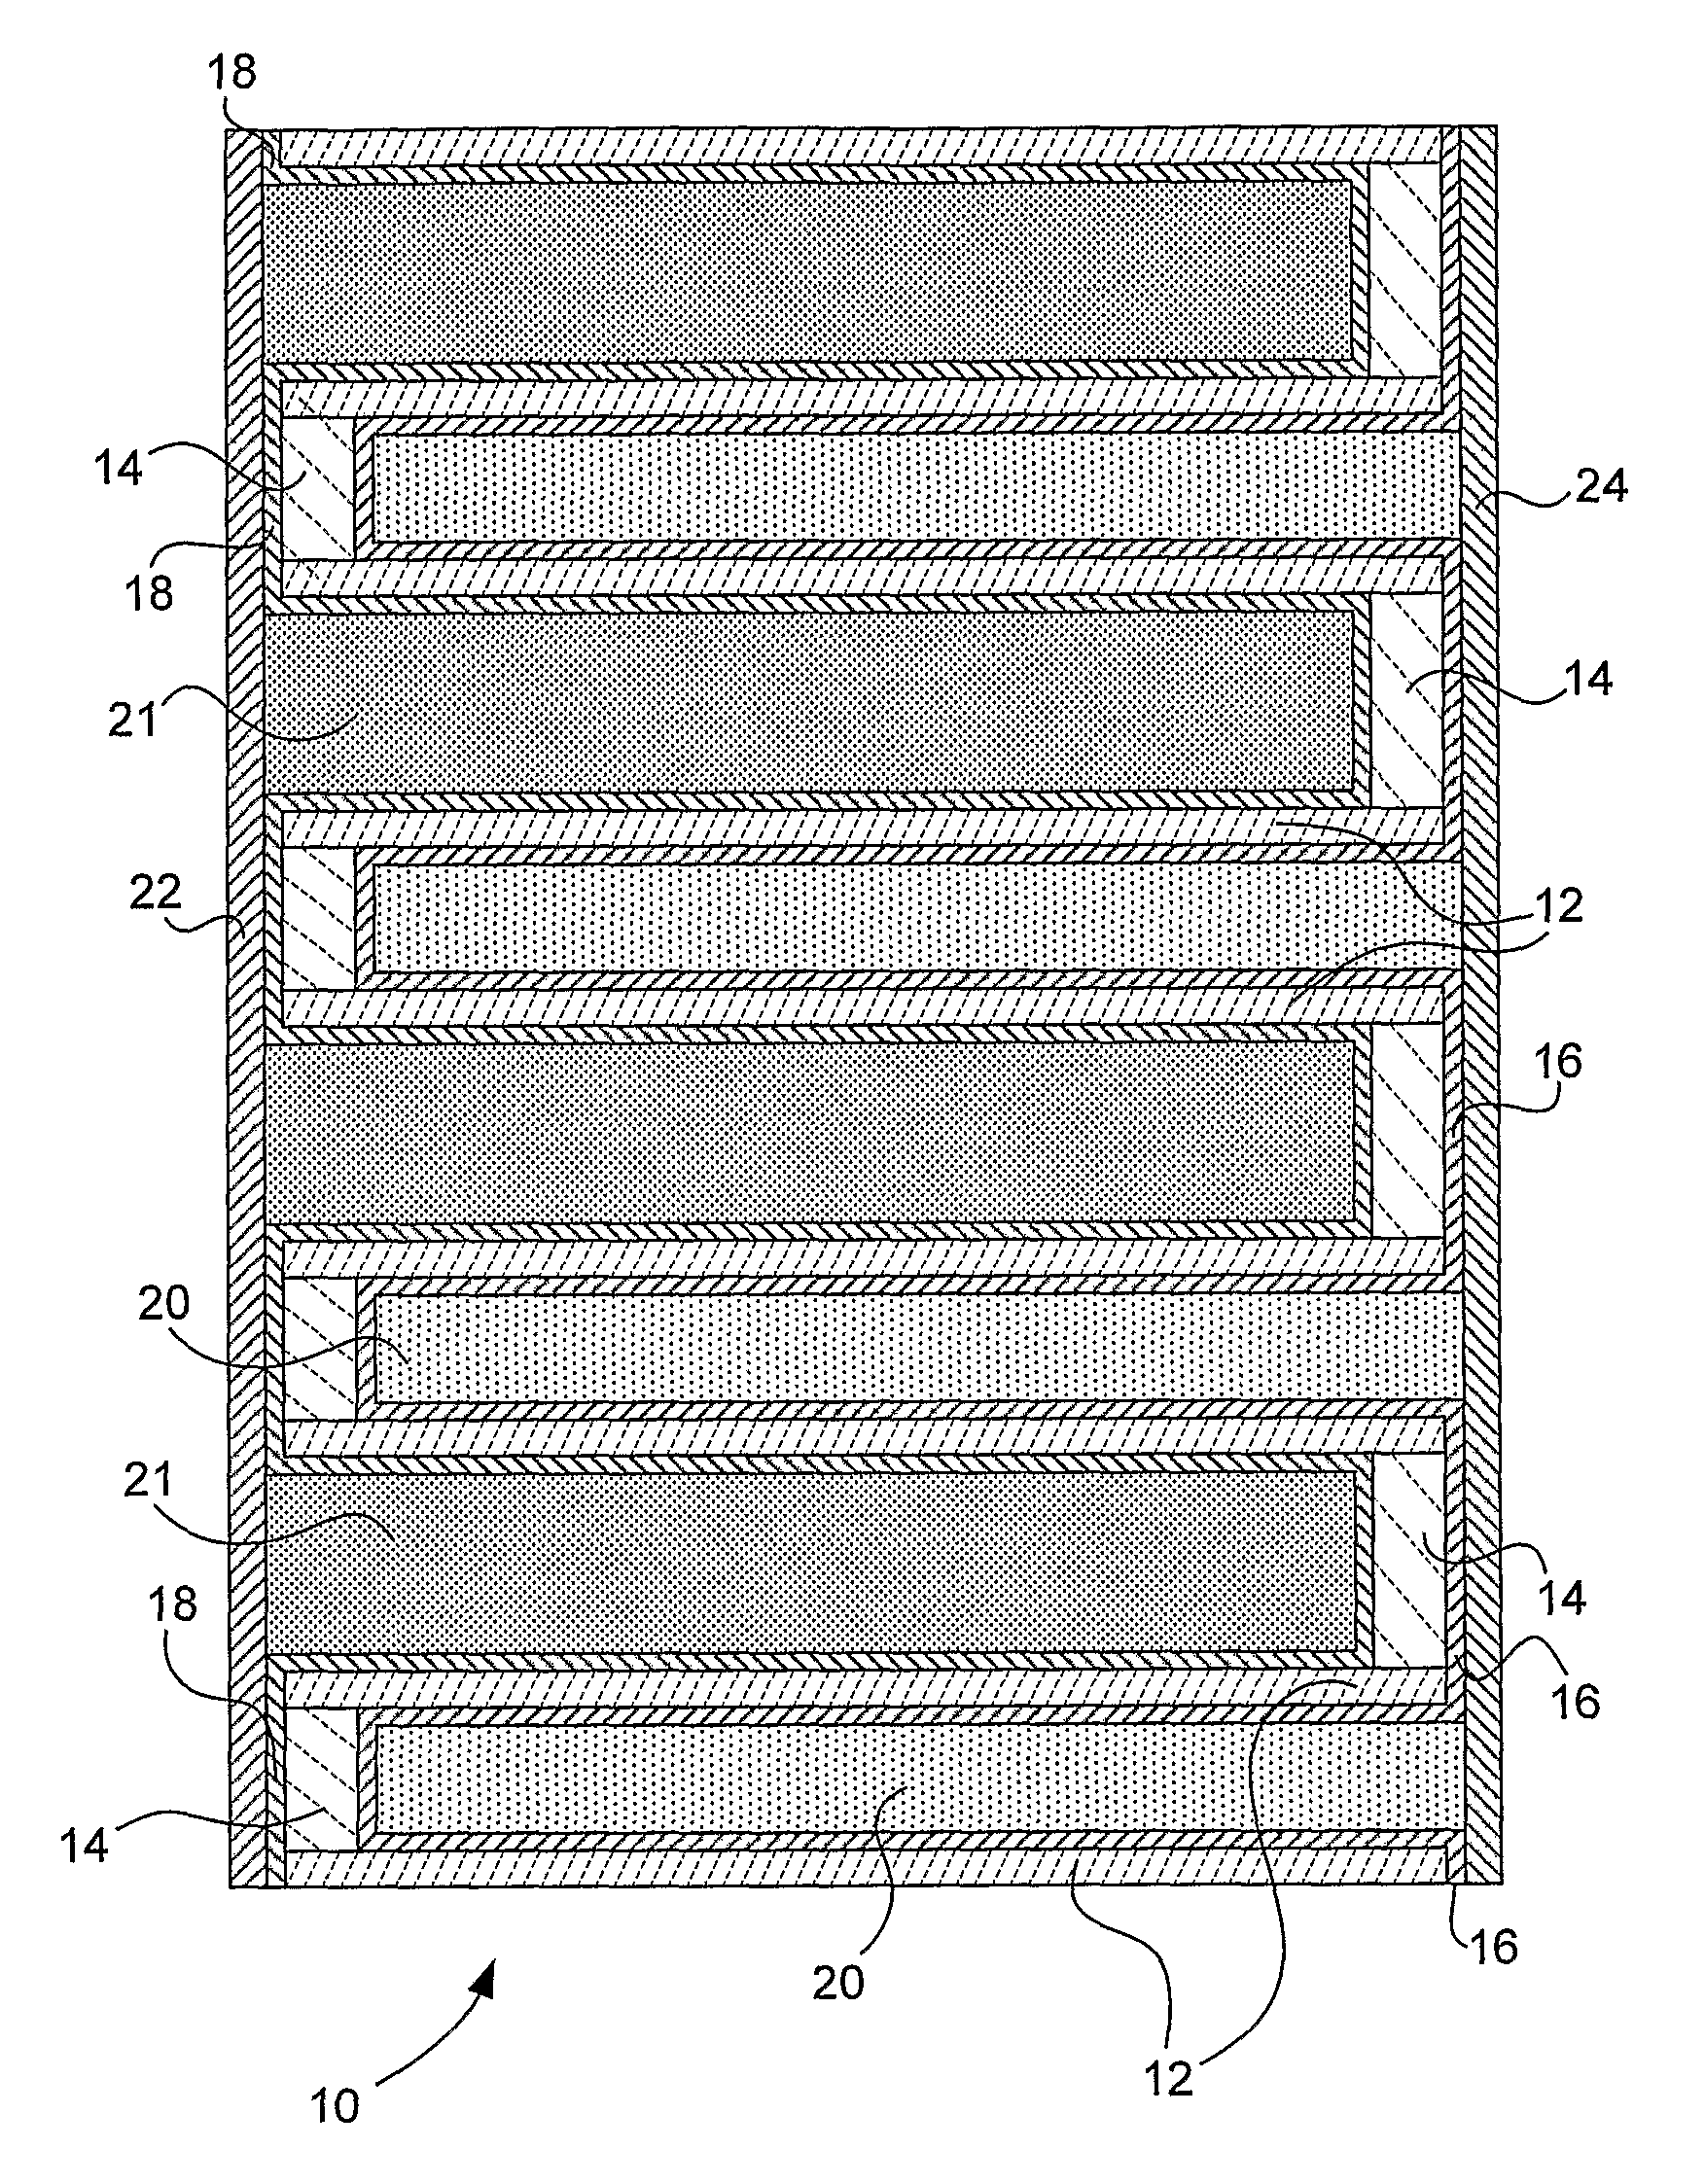 Cellular honeycomb hybrid capacitors with non-uniform cell geometry